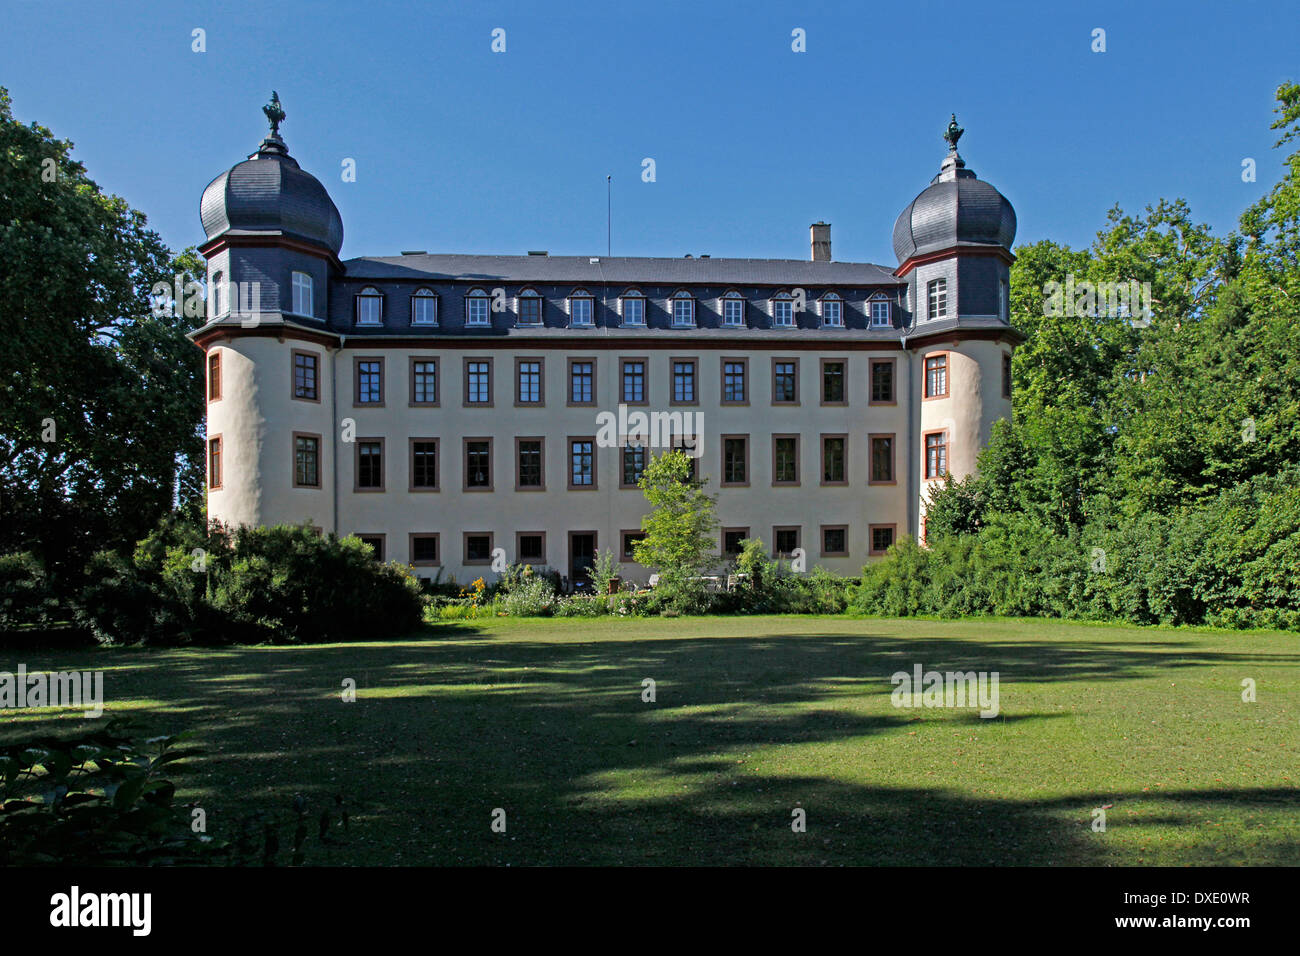 Castle, Lich, district Giessen, Hesse, Germany Stock Photo